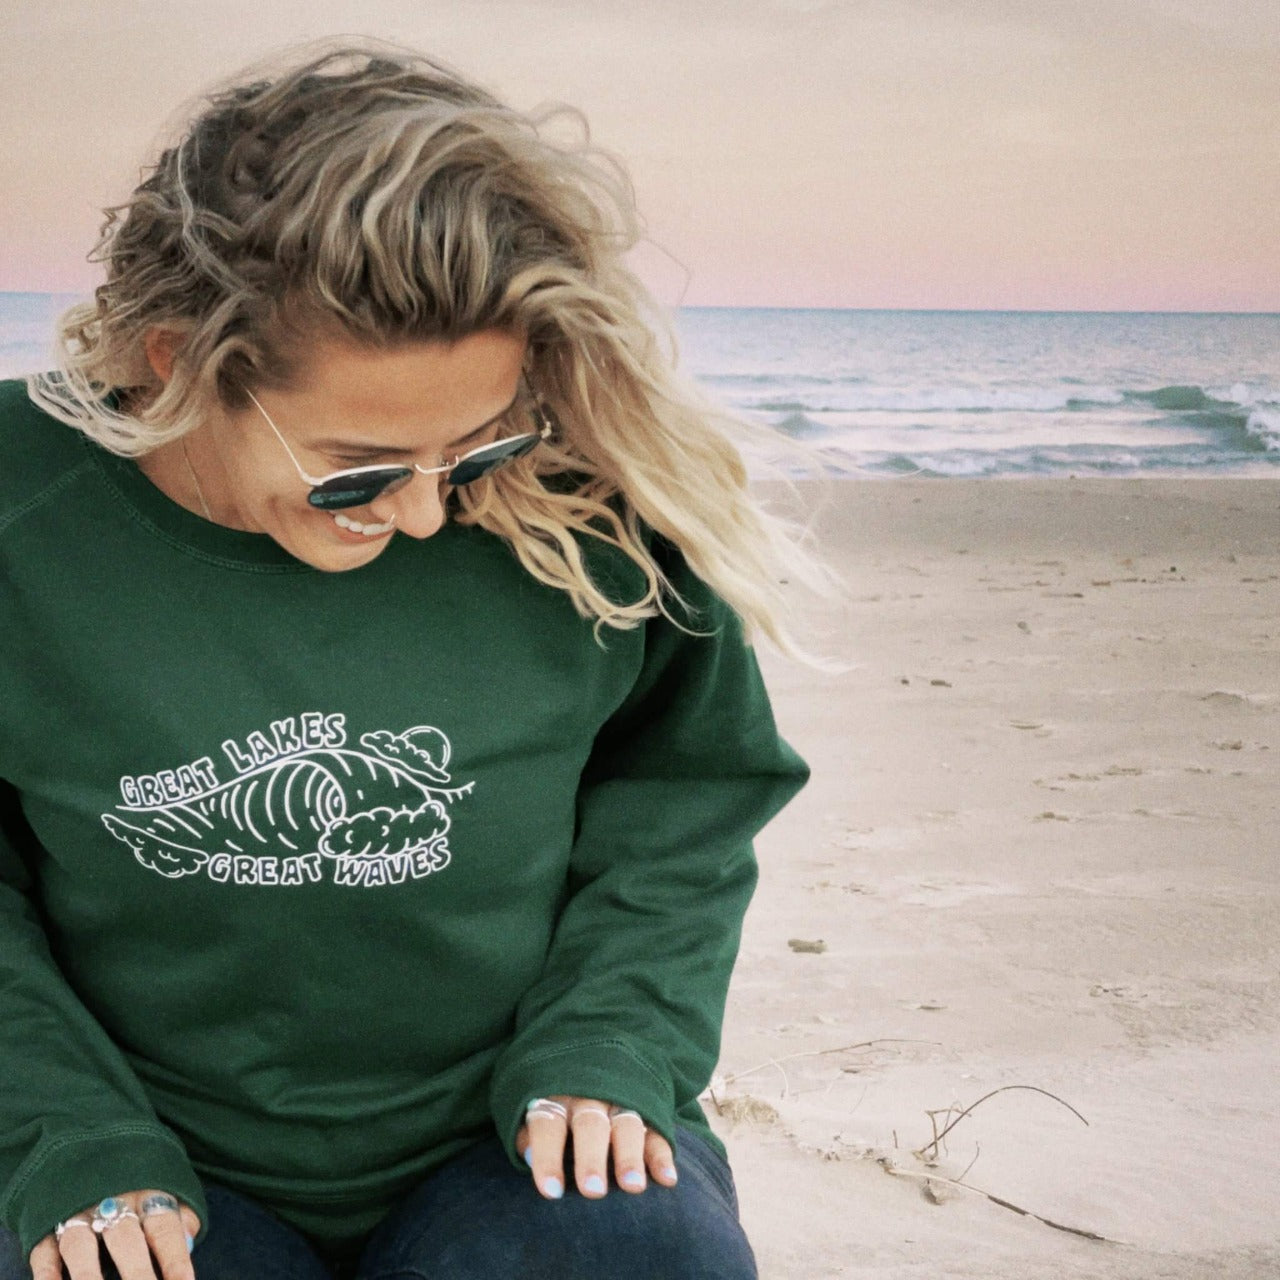 "Great Lakes, Great Waves" crewneck for Great Lakes lovers and Great Lakes surfers.